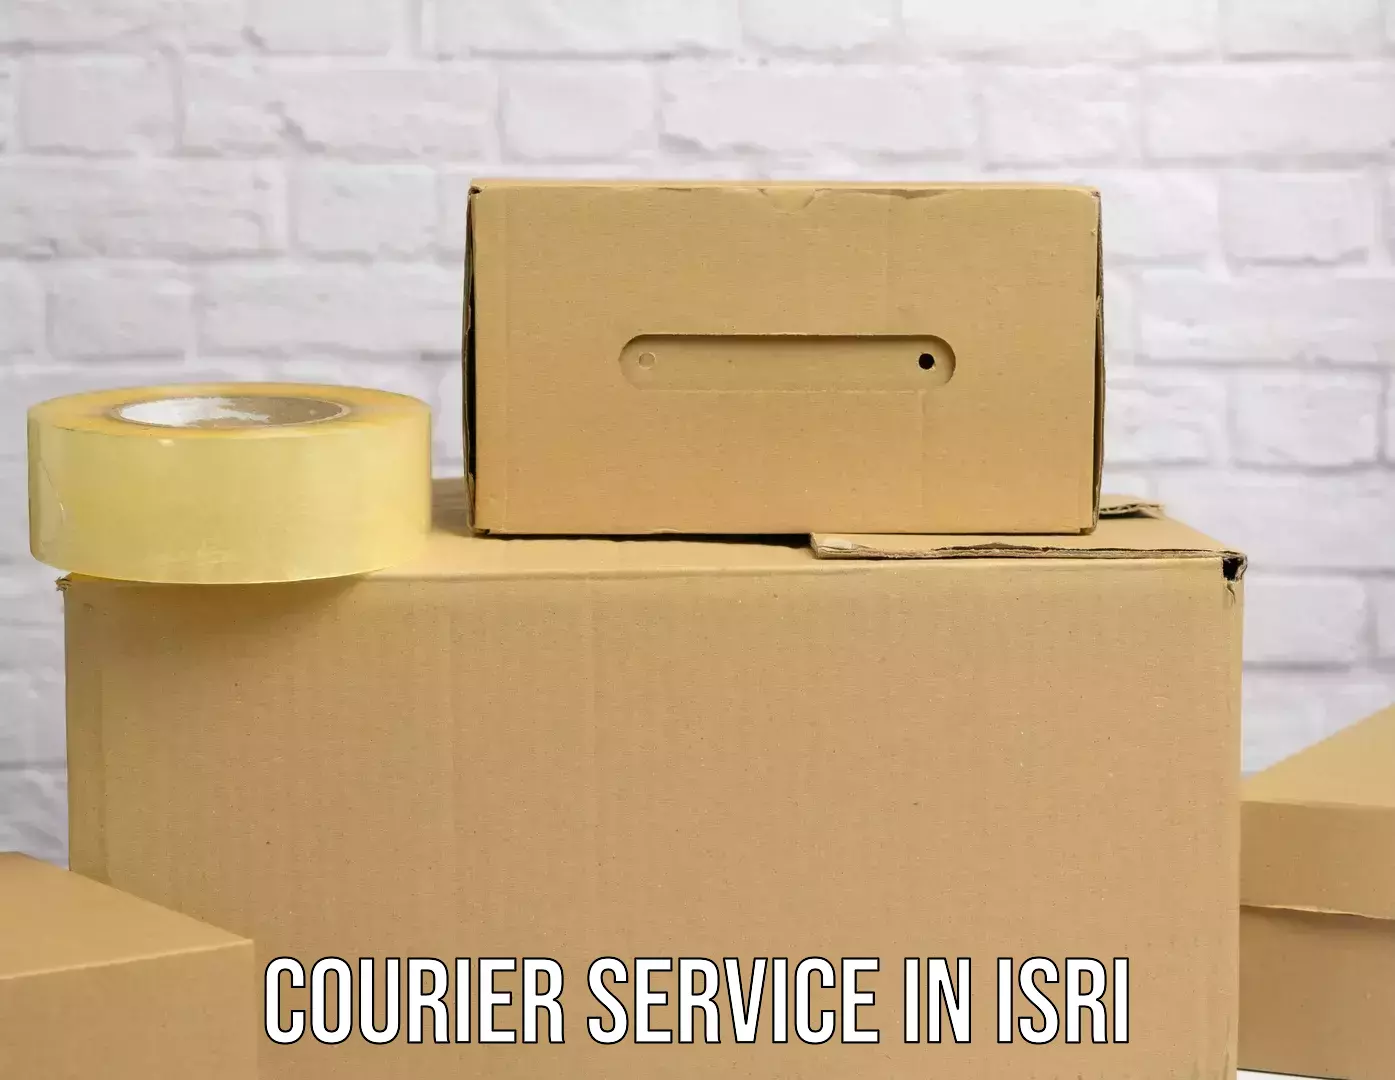 State-of-the-art courier technology in Isri